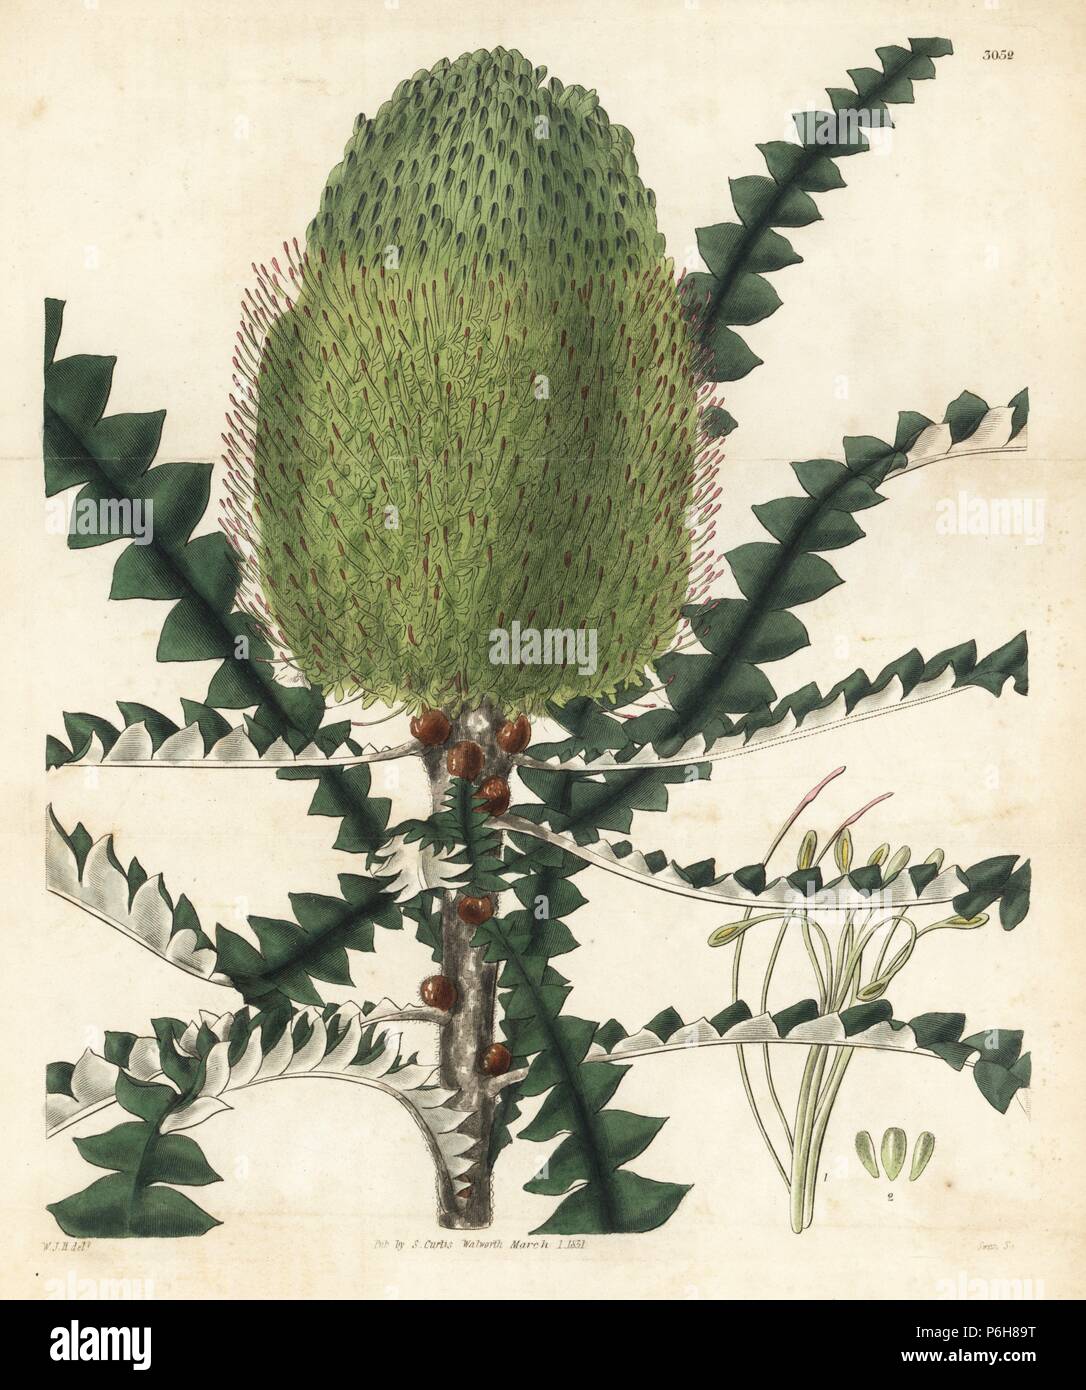 Handsome or showy banksia, Banksia speciosa. Handcoloured copperplate ...